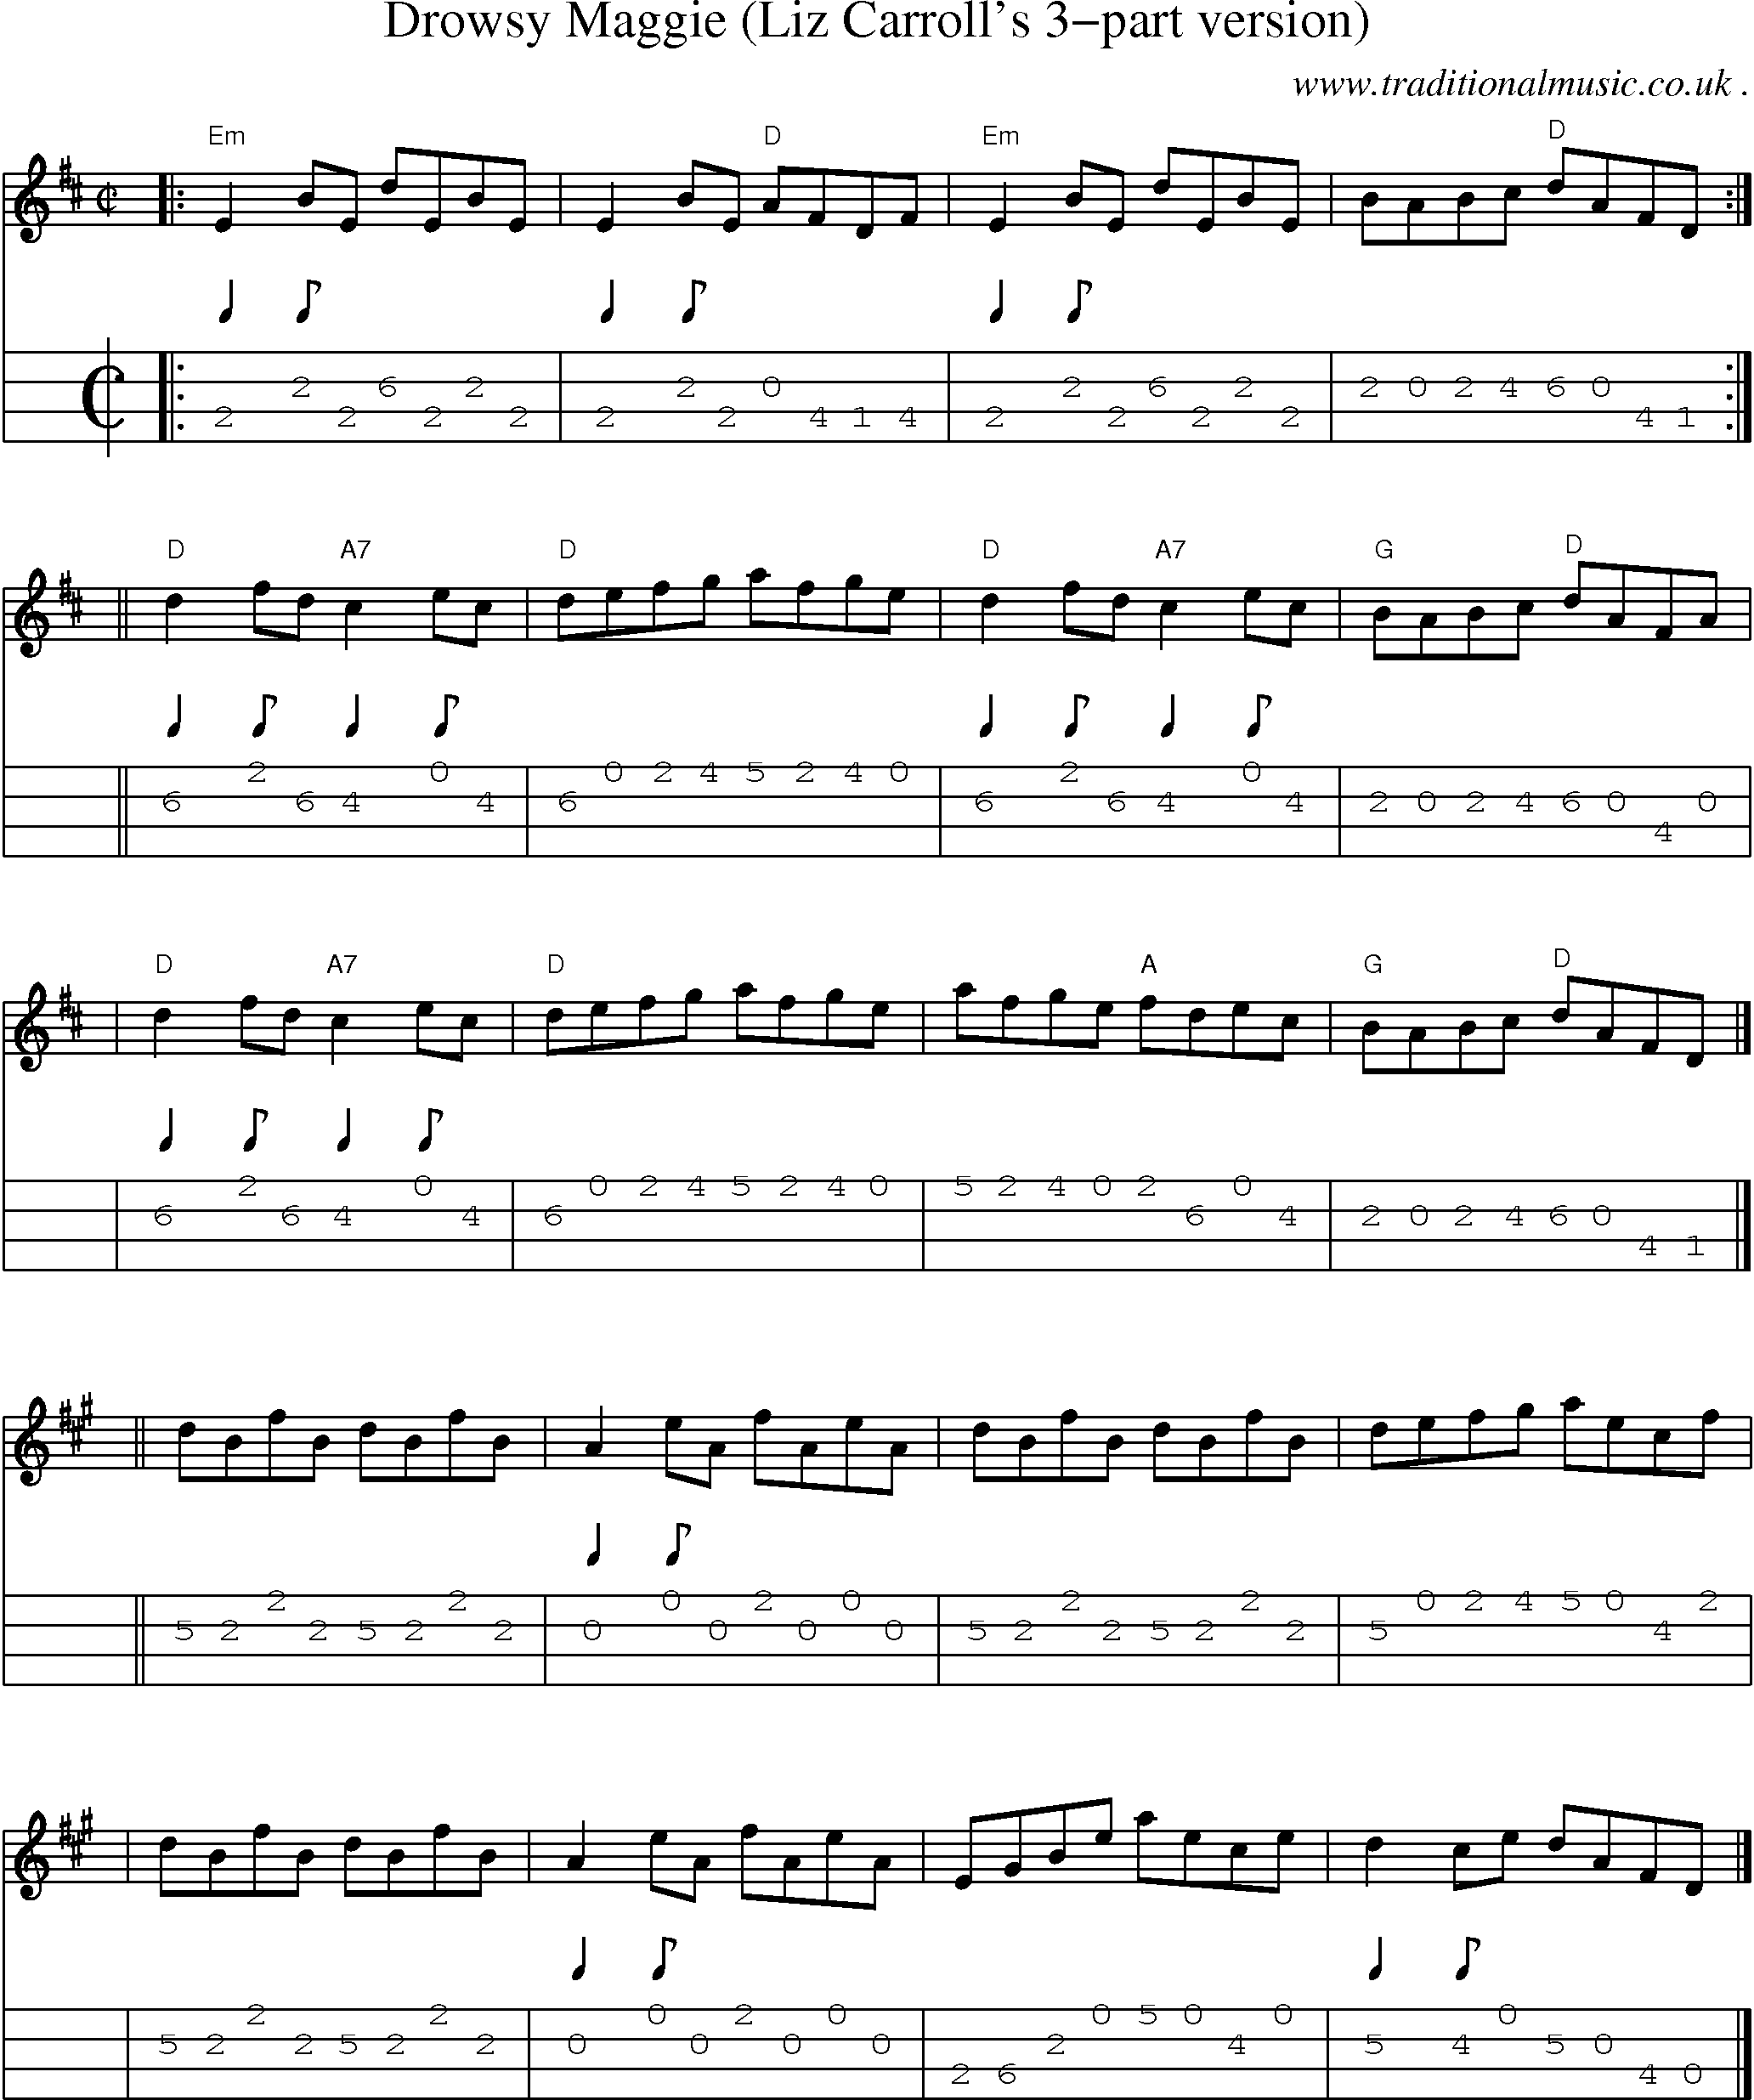 Sheet-music  score, Chords and Mandolin Tabs for Drowsy Maggie Liz Carrolls 3-part Version